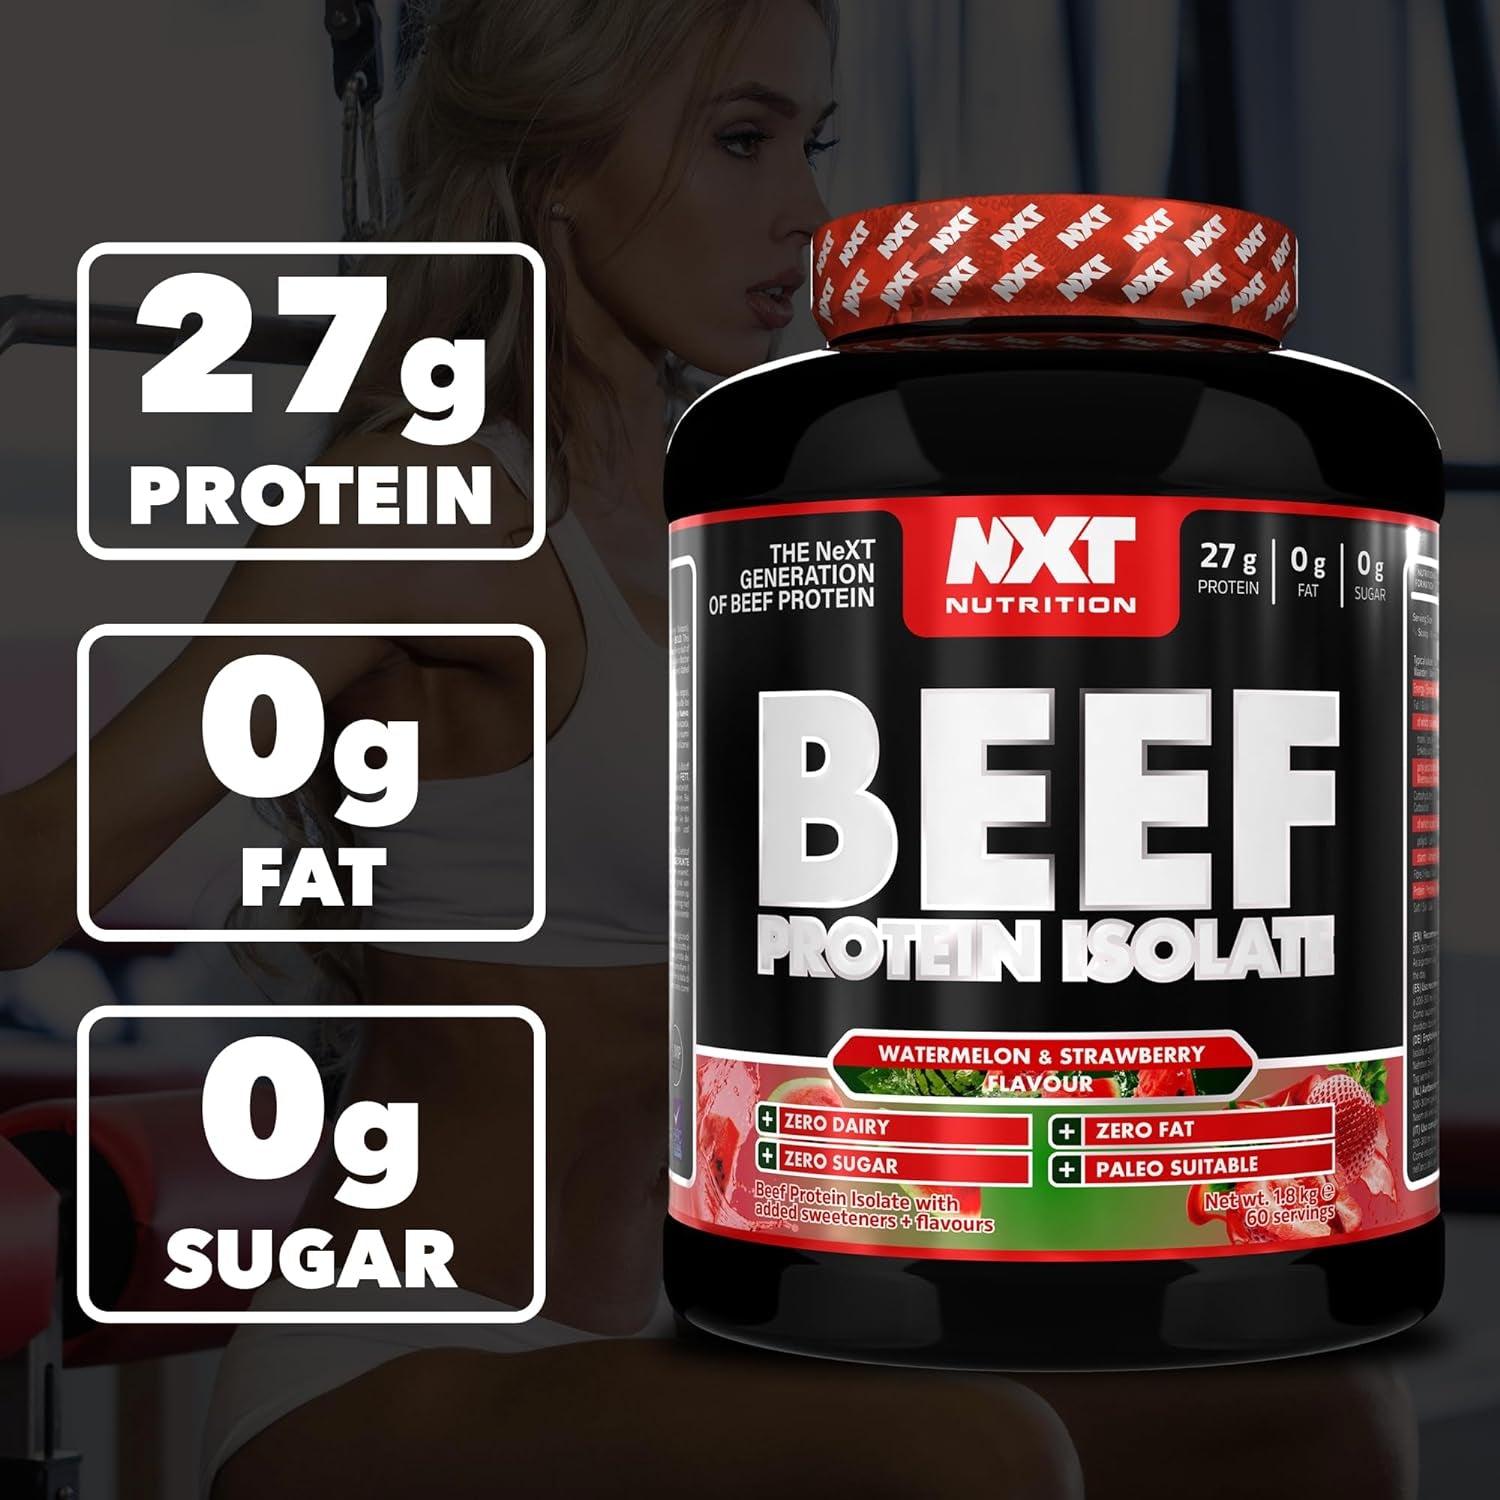 Beef Protein Isolate Powder - Protein Powder High in Natural Amino Acids - Paleo, Keto Friendly - Dairy and Gluten Free - Muscle Recovery | 1.8Kg (Watermelon & Strawberry)